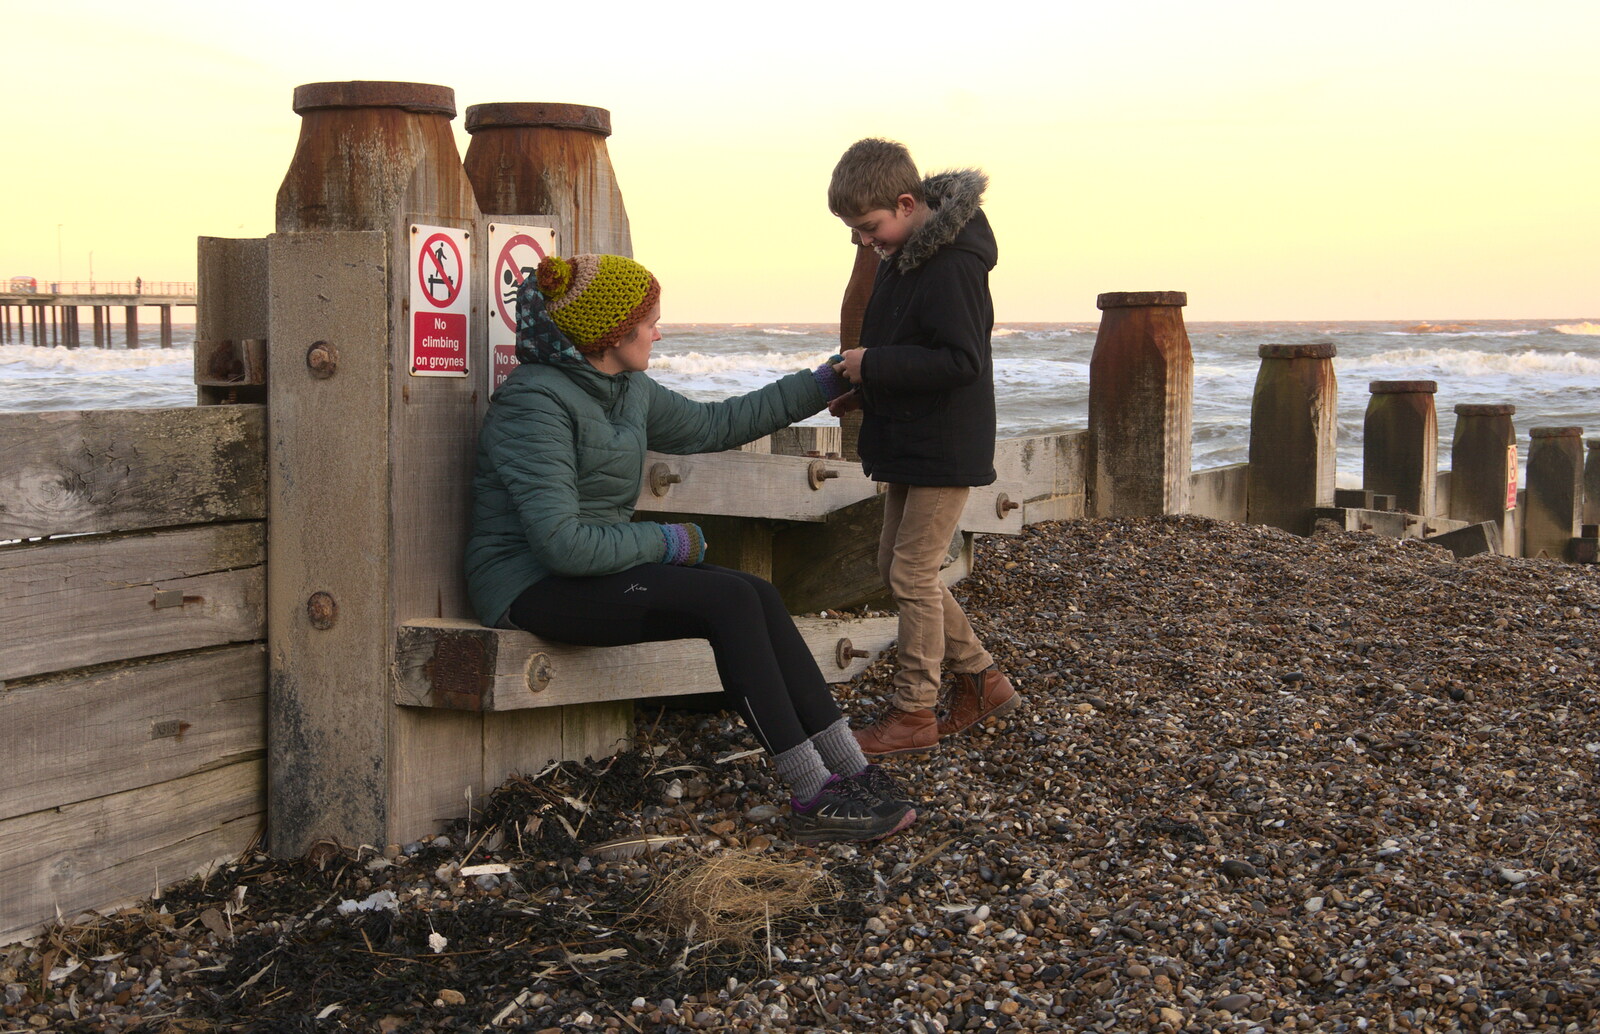 Isobel gives Fred something she's found from Sunset at the Beach, Southwold, Suffolk - 18th November 2018